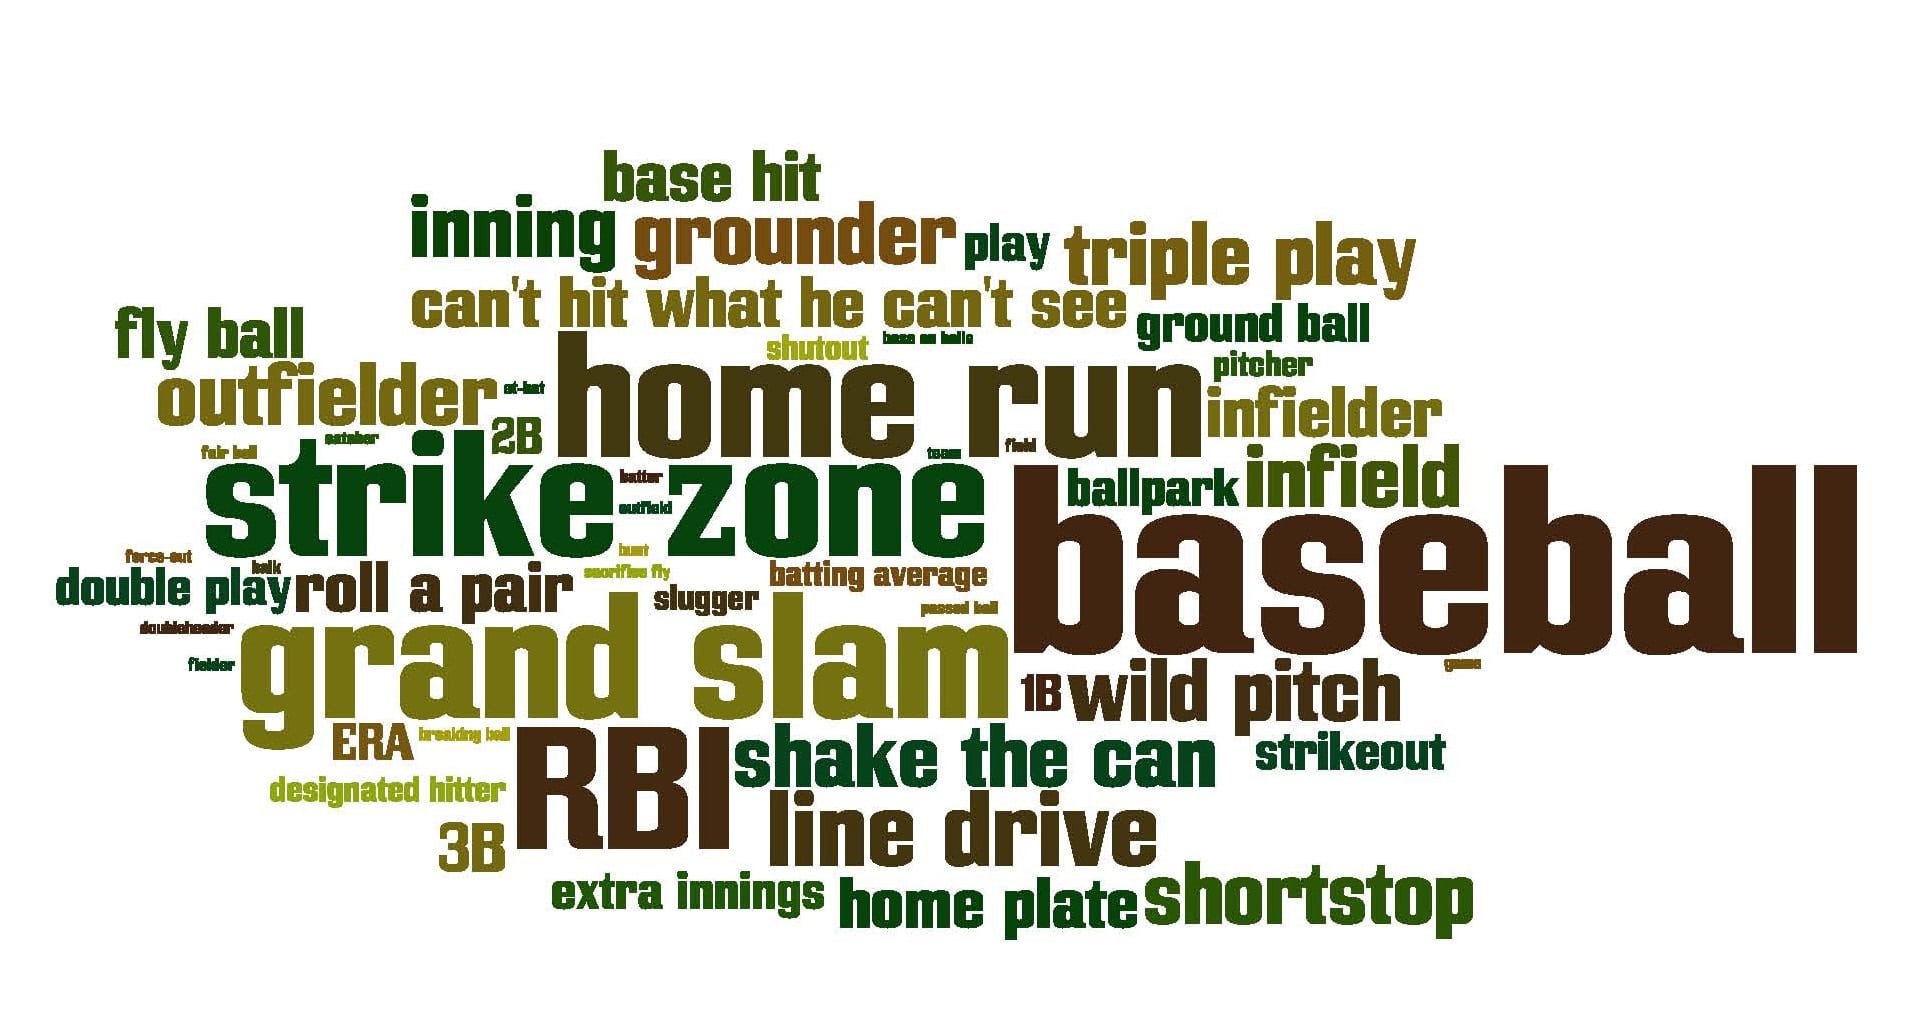 collection or "cloud" of baseball words